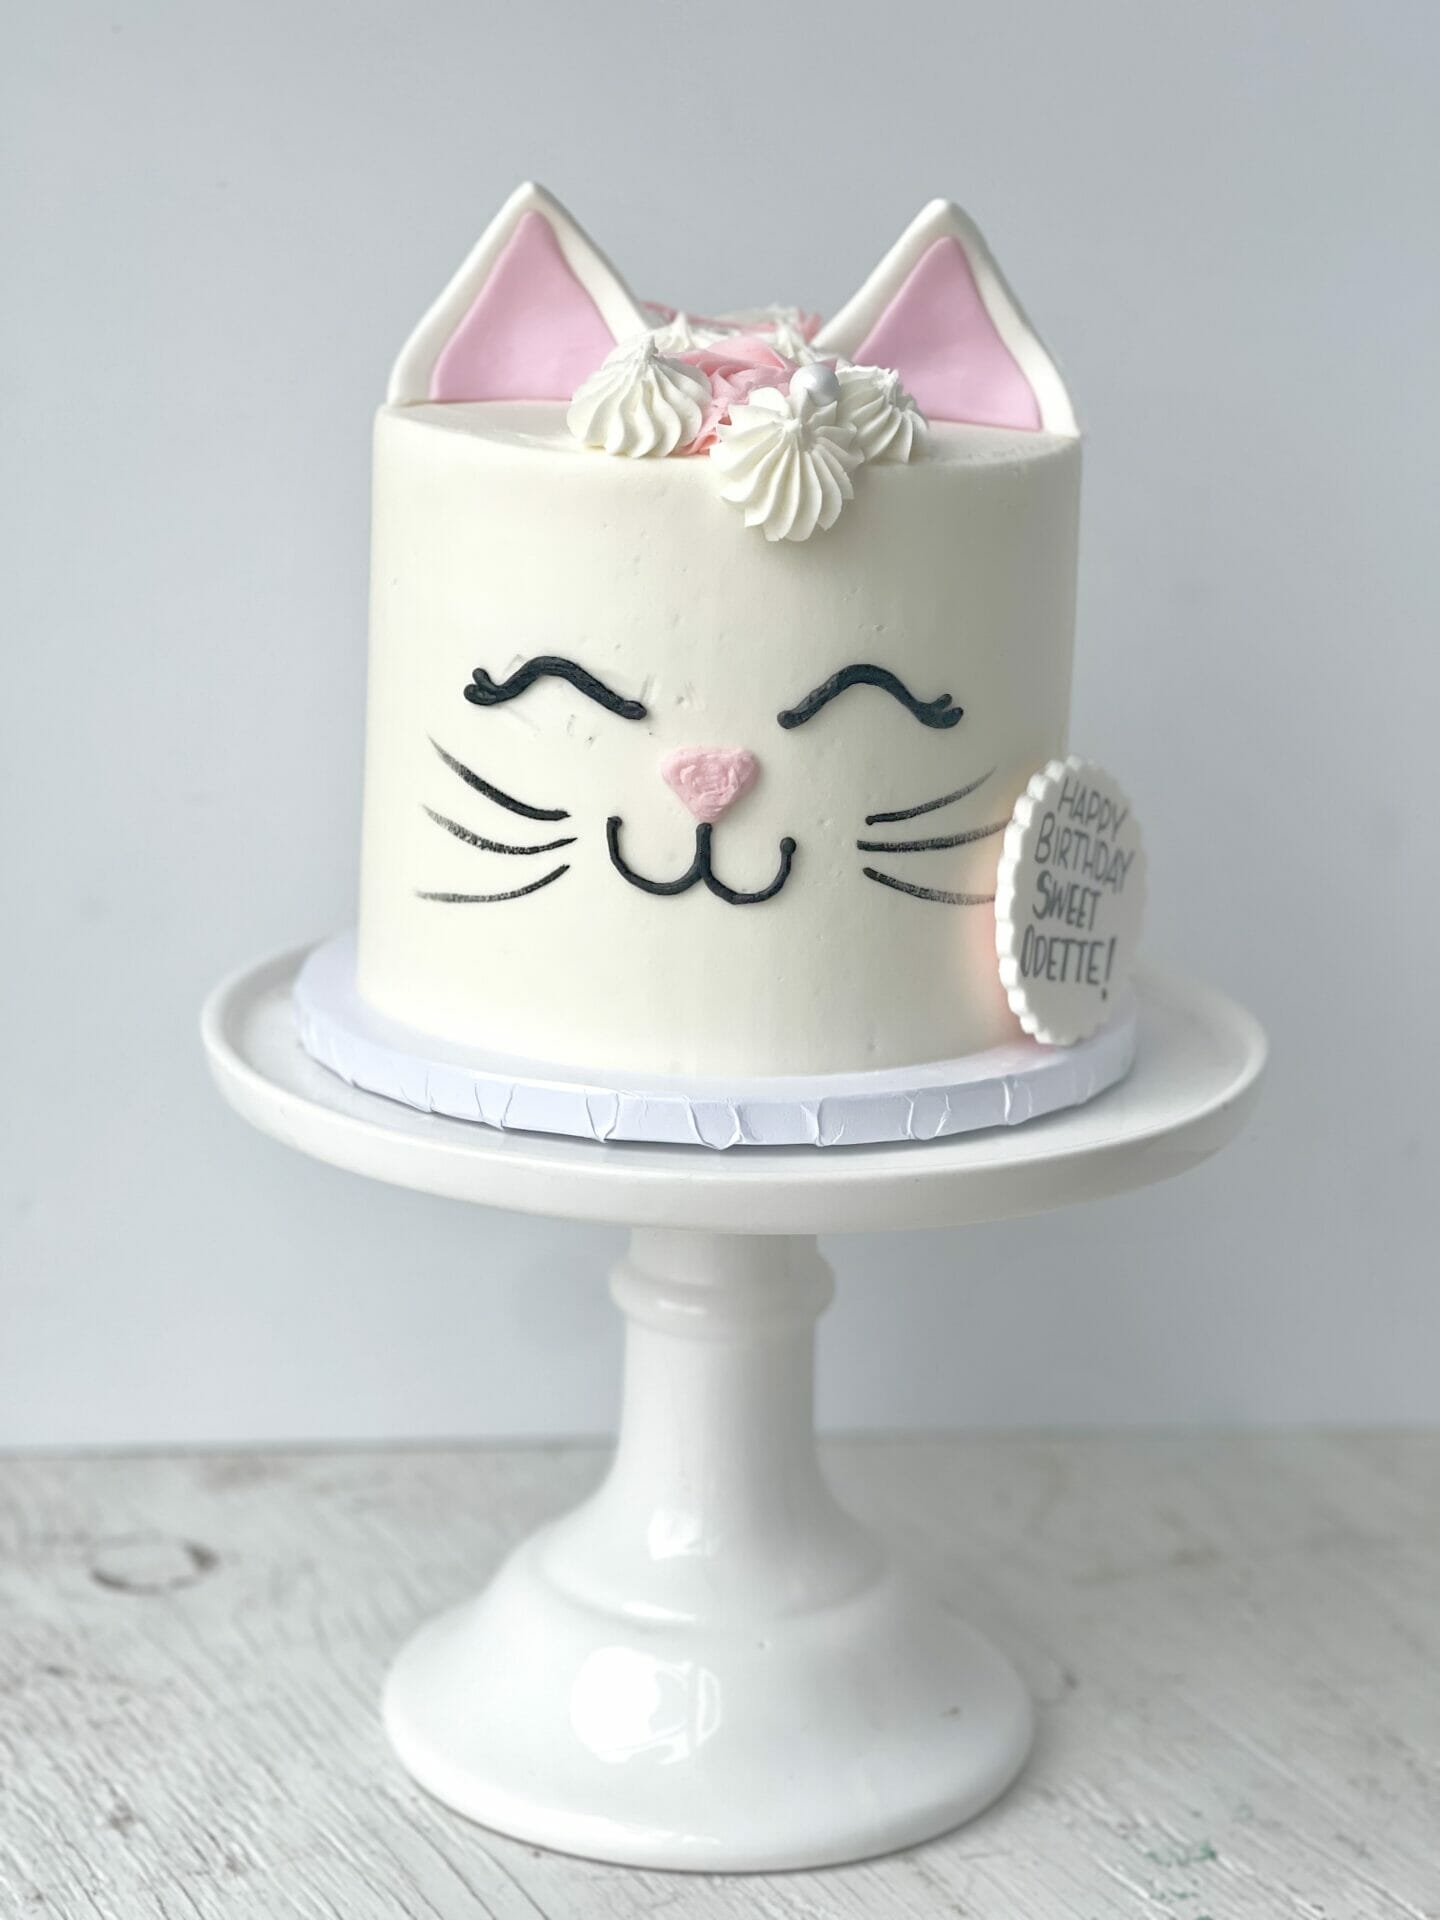 The Cutest Ever Kitty Cat Cakes - Cake Geek Magazine